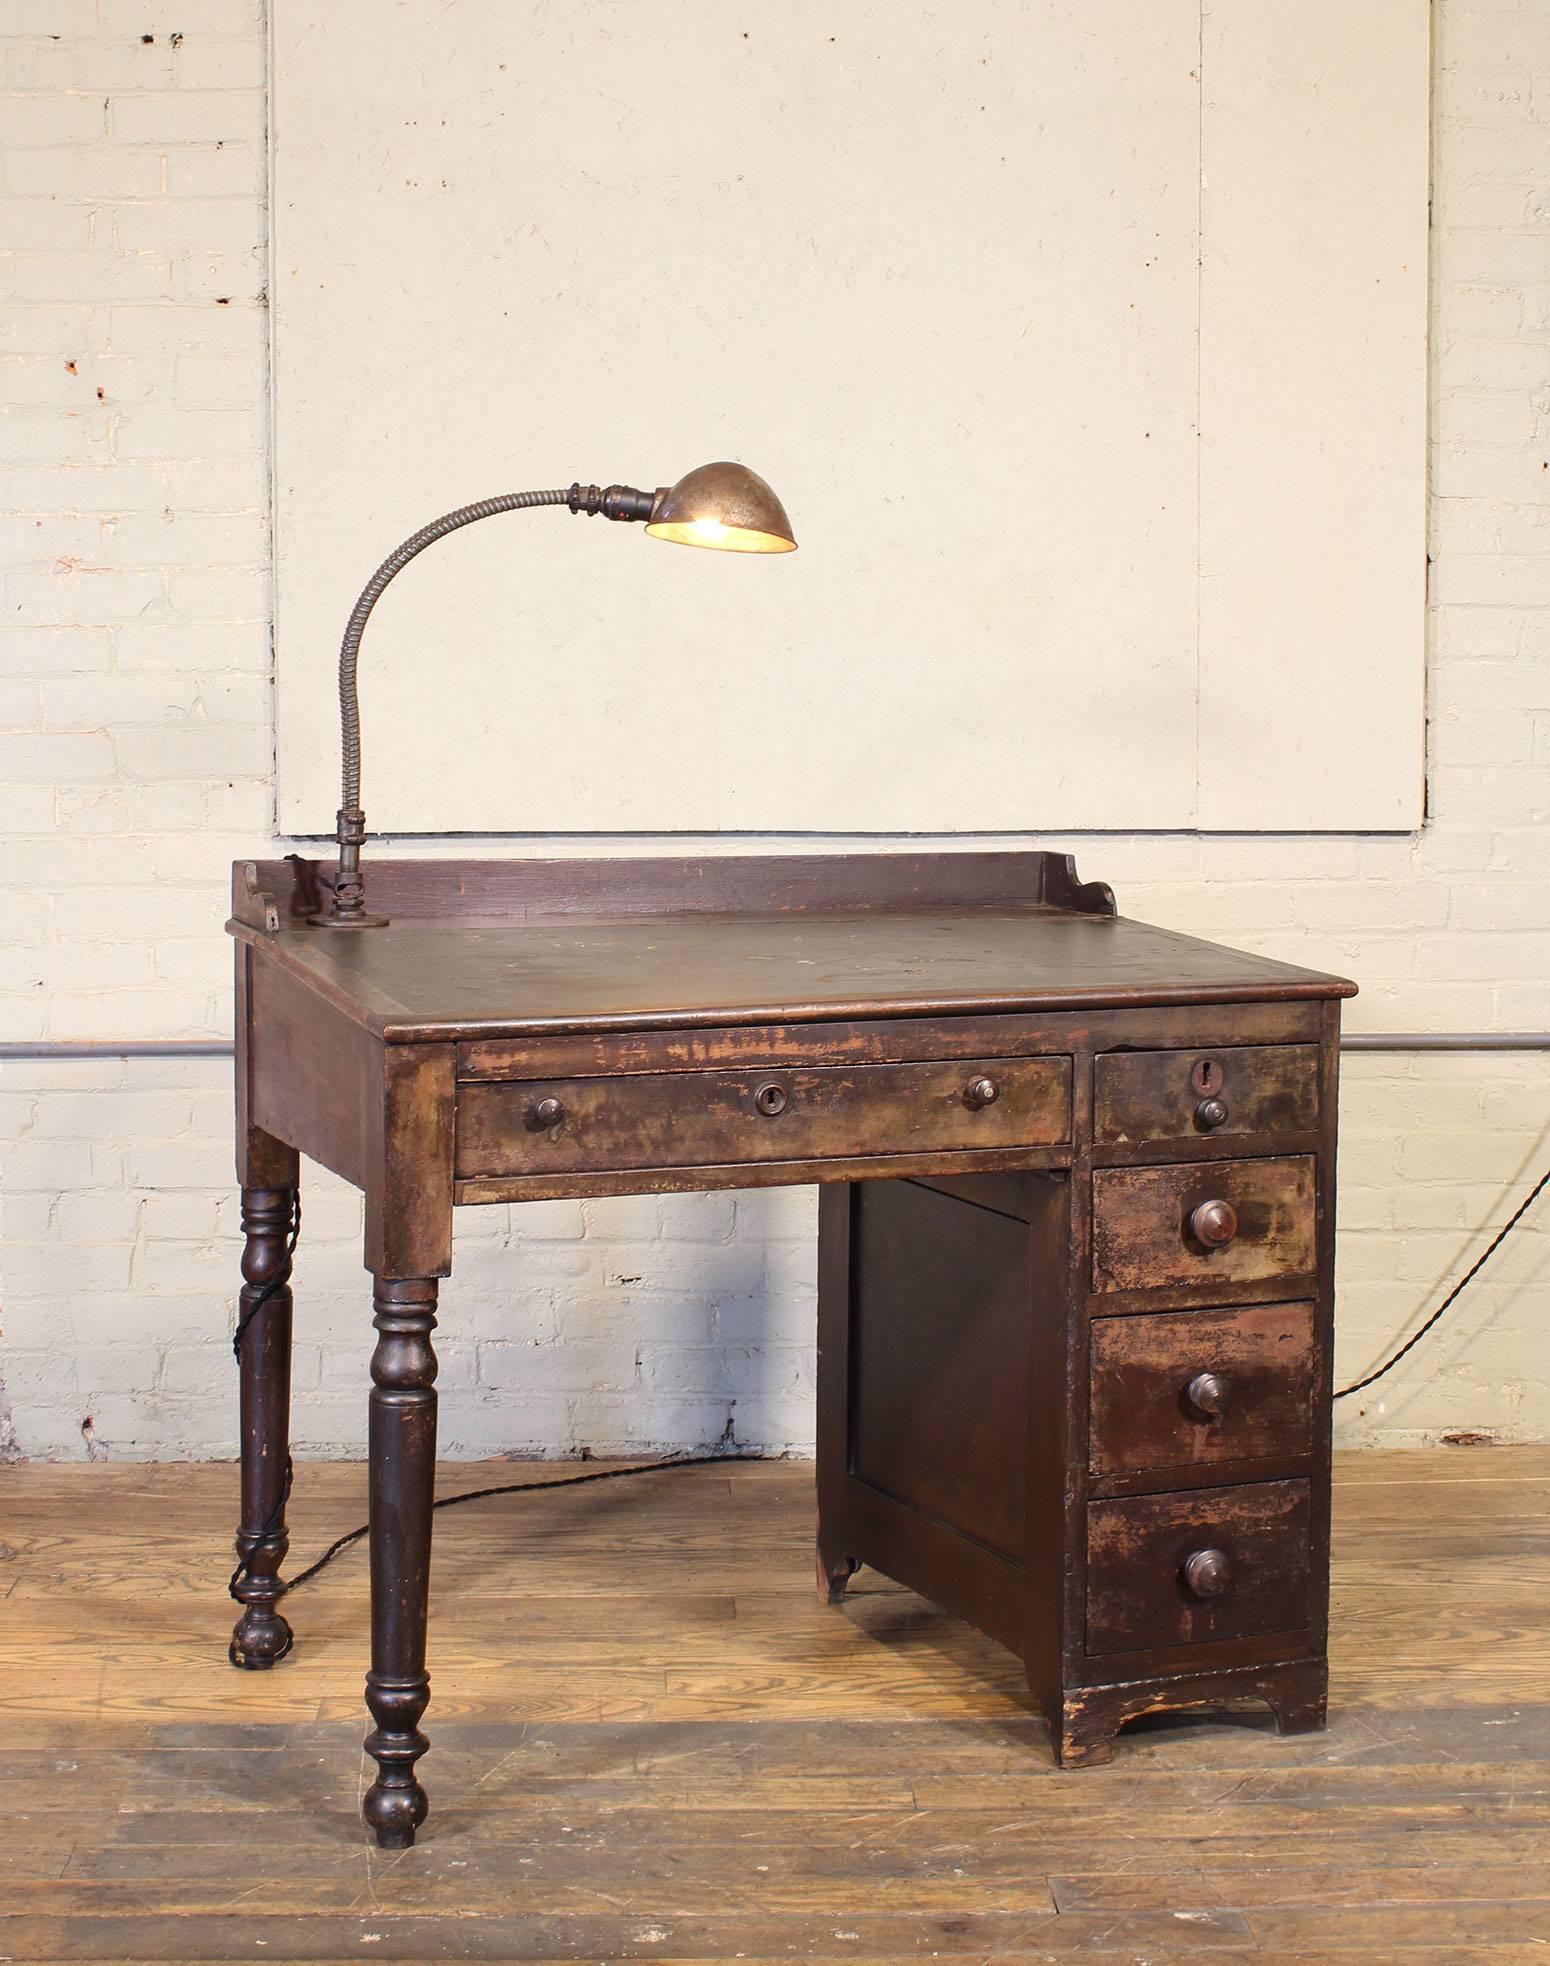 Vintage authentic clerk's work bench / desk / table industrial style from the 1940s. Features an adjustable desk lamp that pre-dates goose-neck. Sloped top with weathered leather or similar material. Desk measures 39 3/4